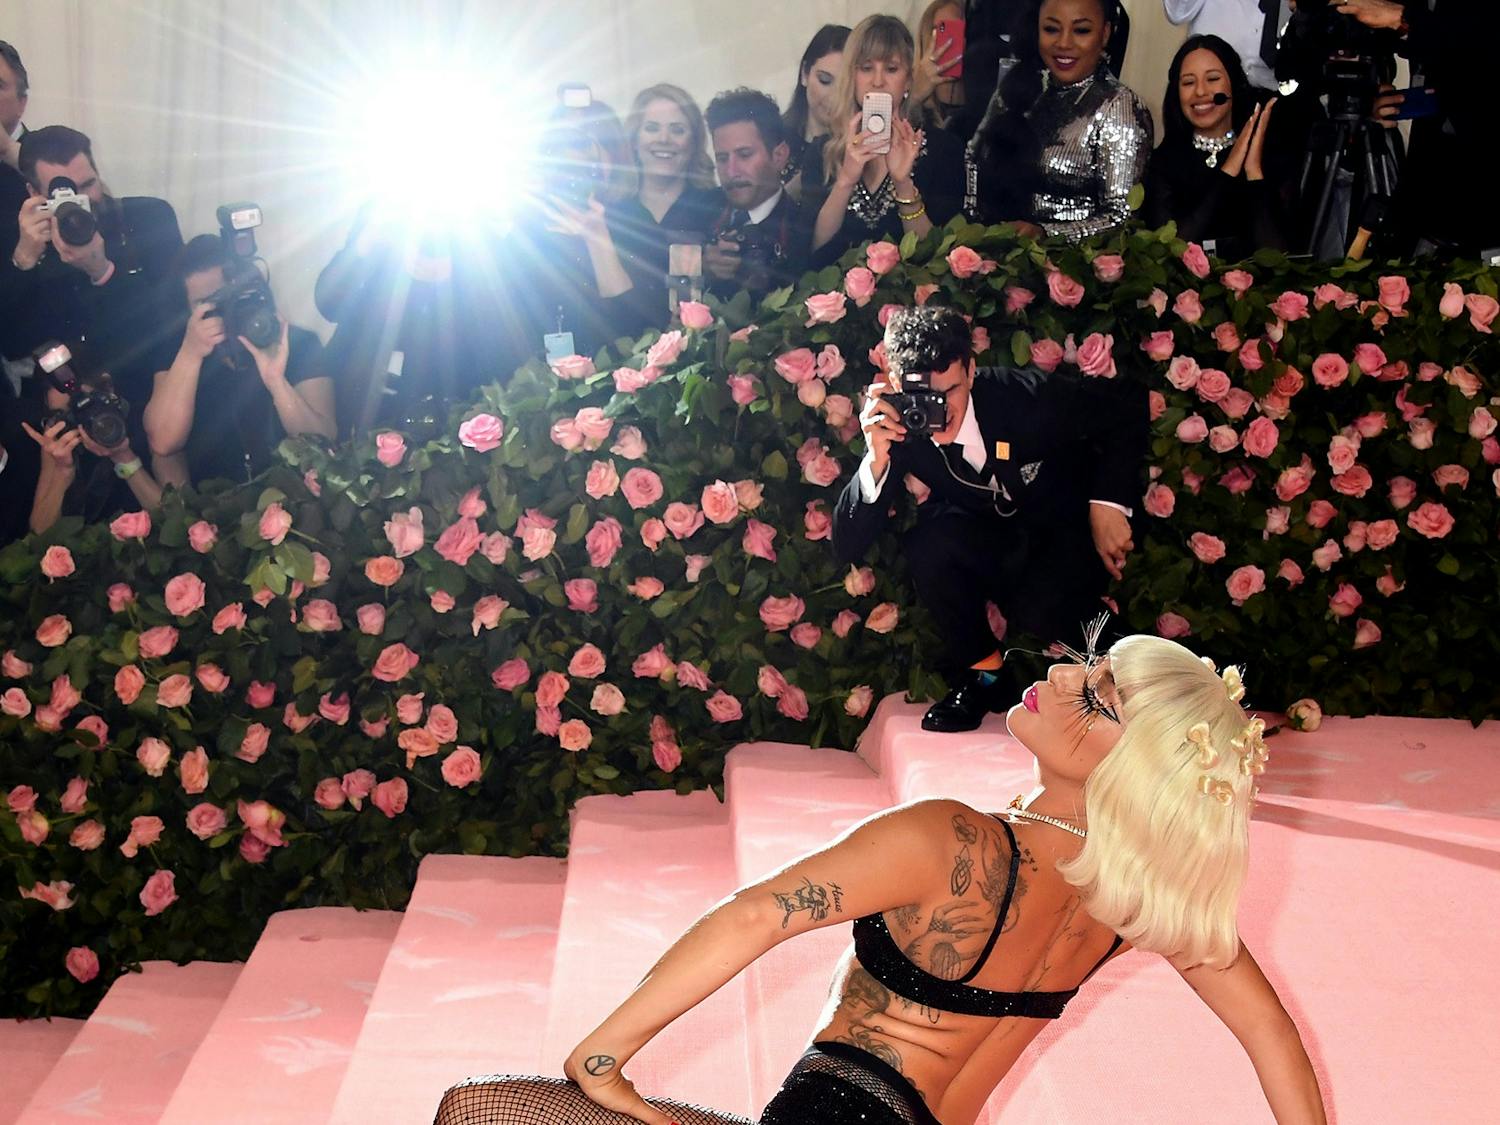 Lady Gaga attending the Metropolitan Museum of Art Costume Institute Benefit Gala on May 6, 2019 in New York, N.Y. Photo courtesy of Jennifer Graylock/PA Wire/Zuma Press/TNS